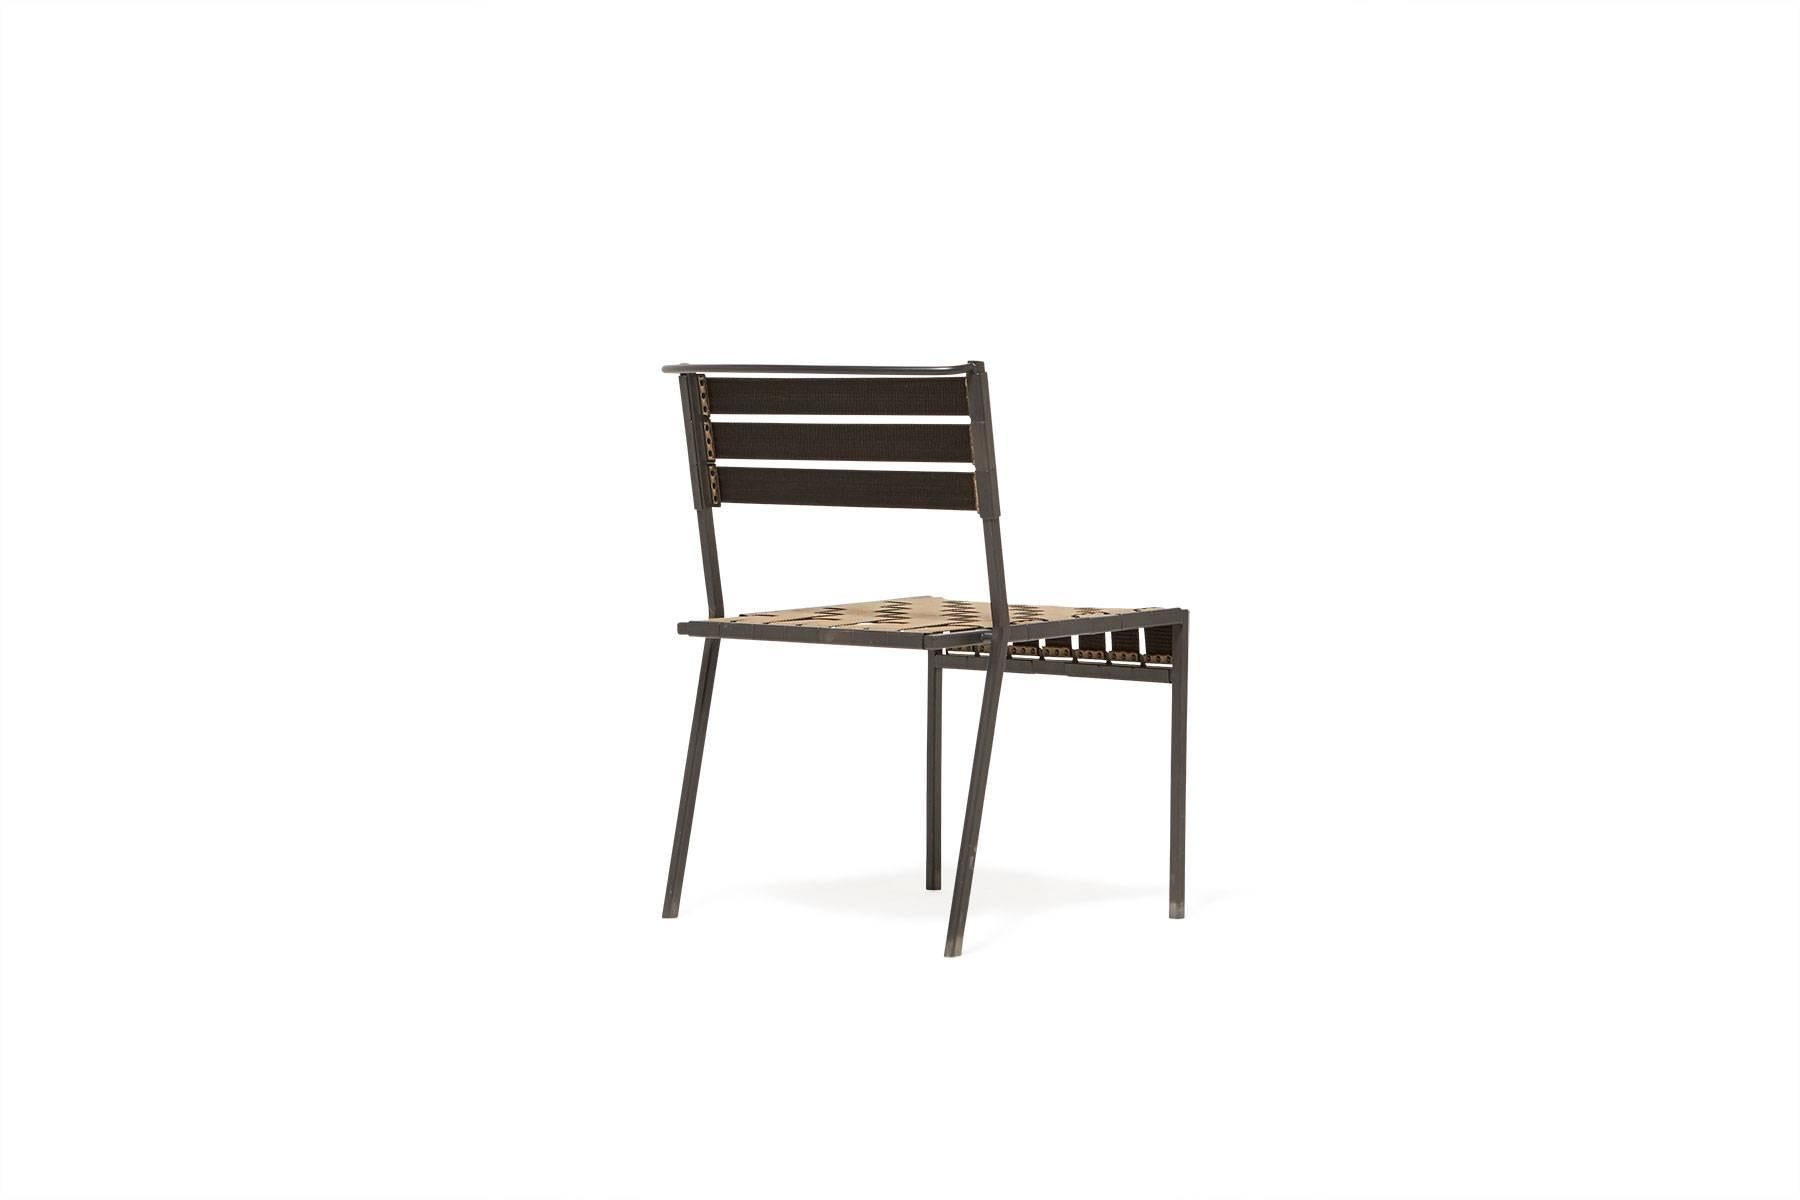 American Outdoor Tan and Charcoal Dining Chair For Sale